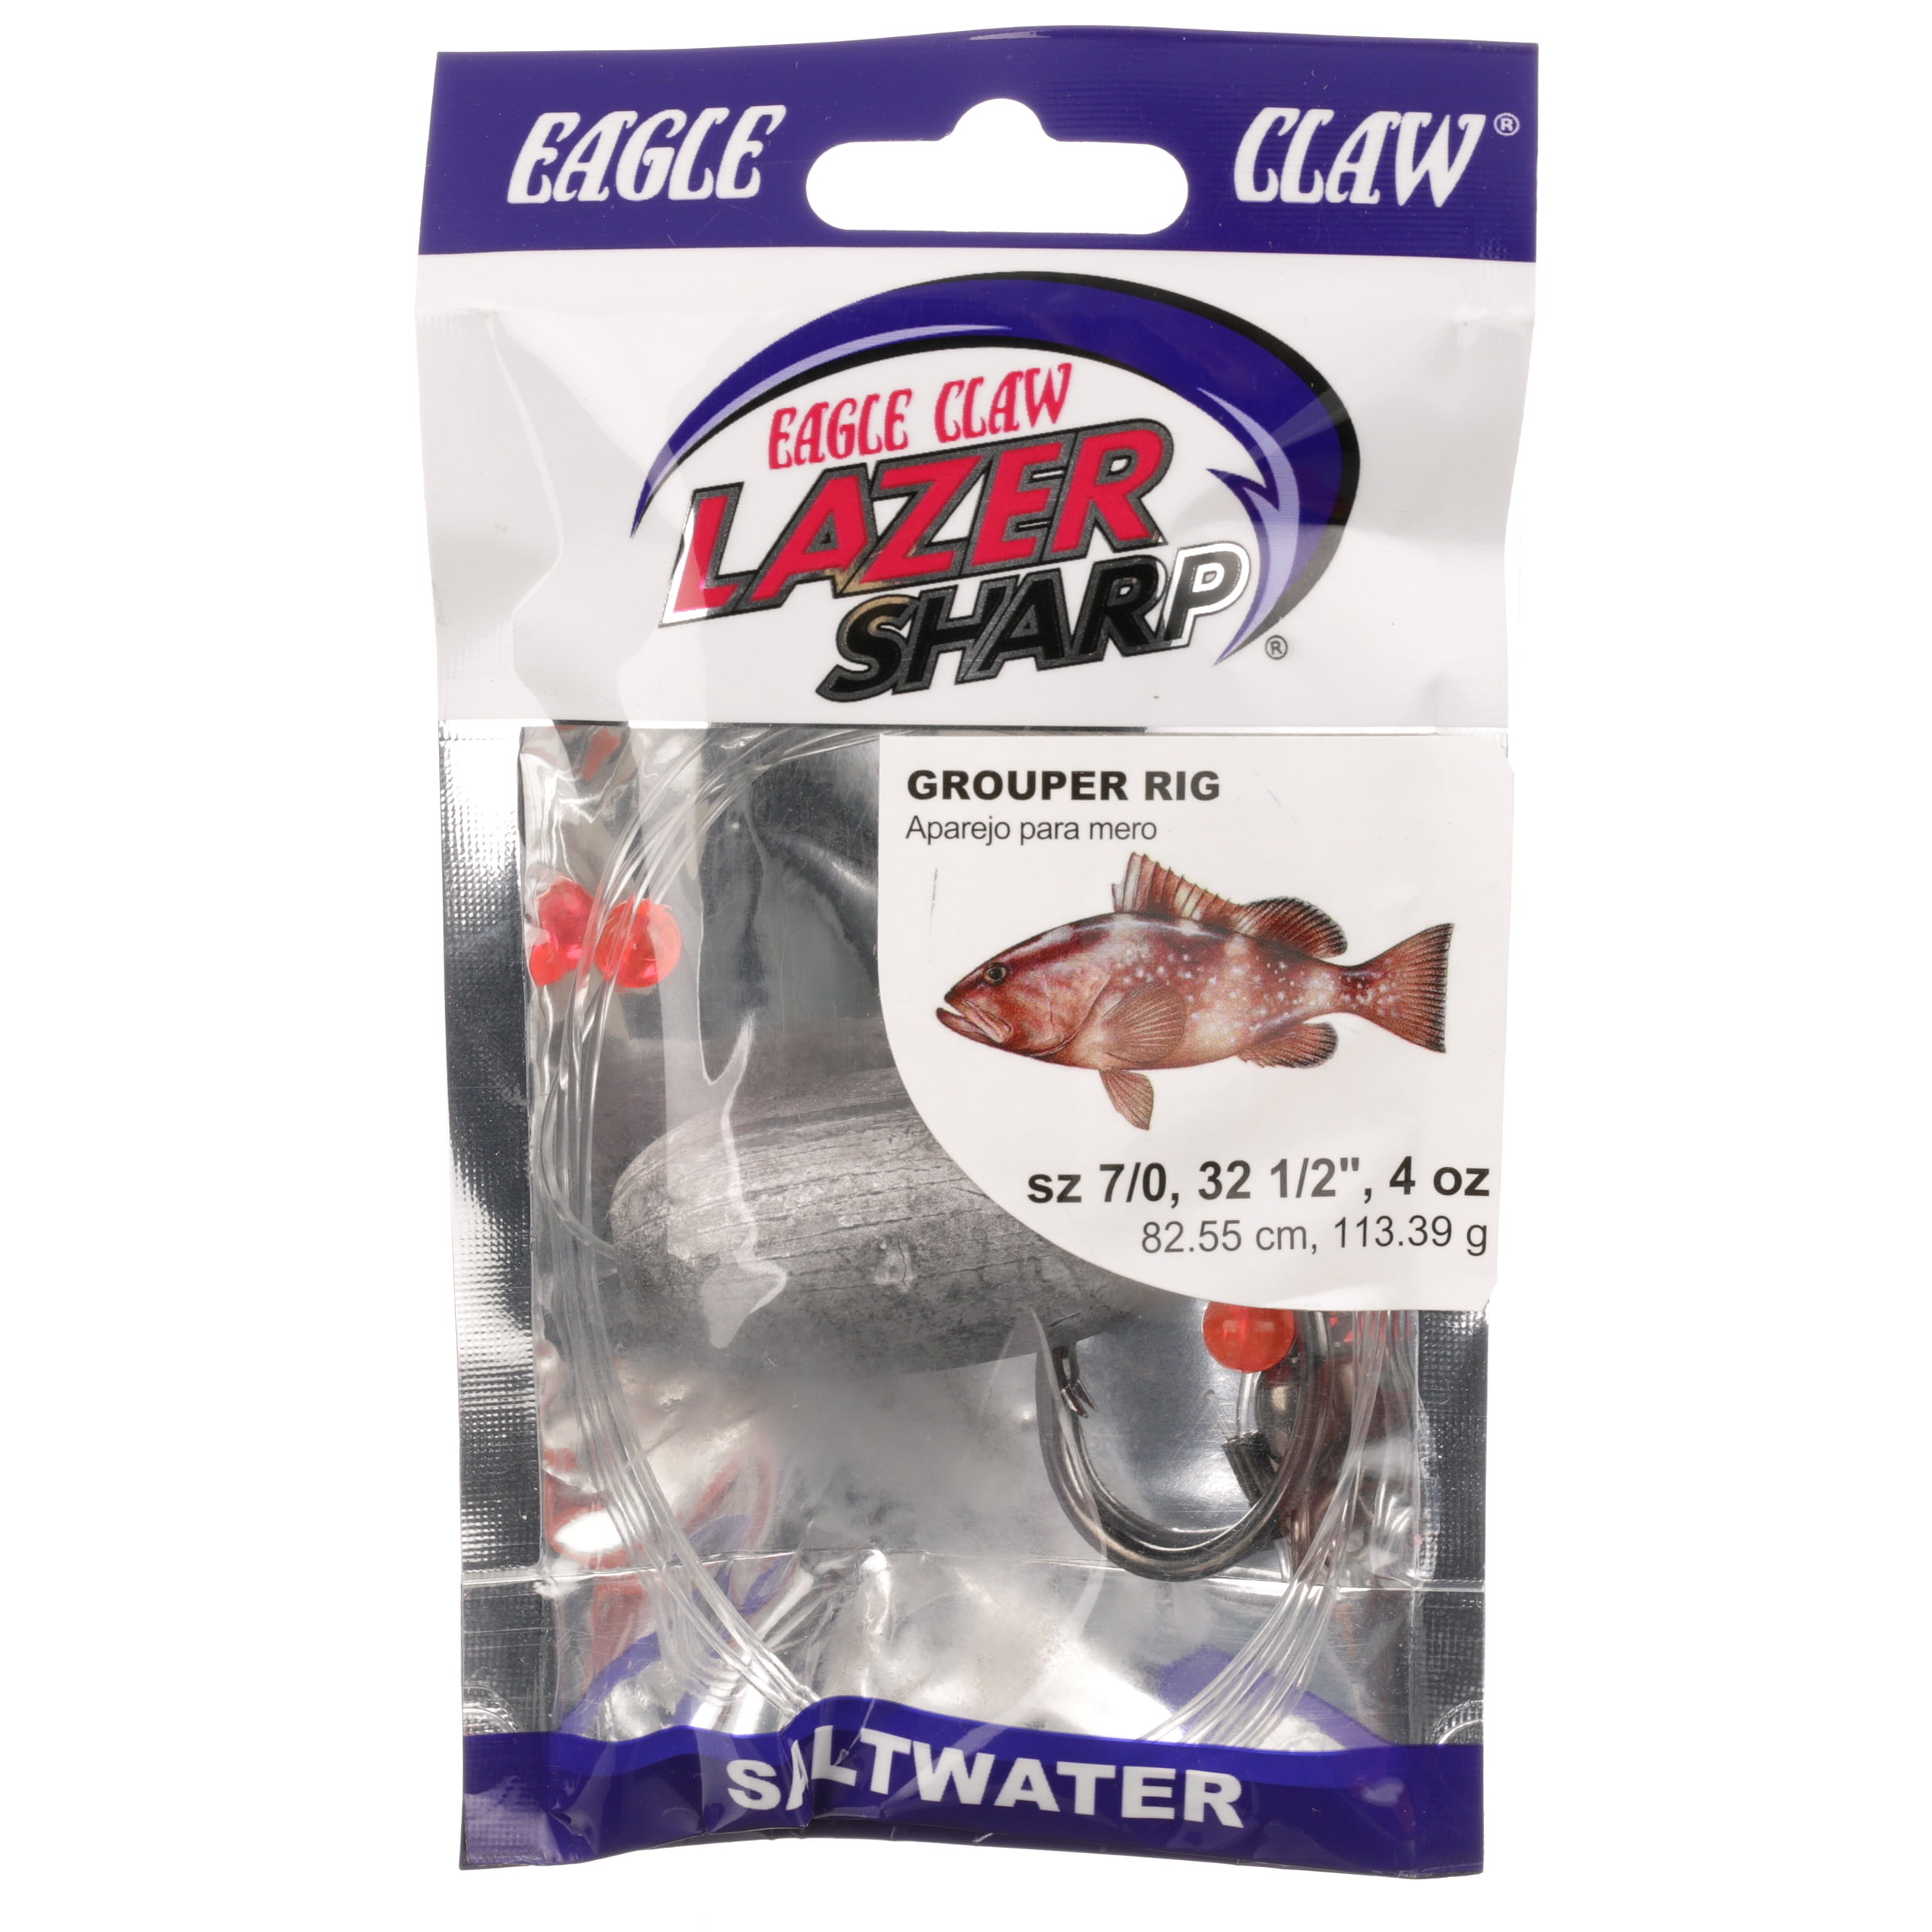 Lazer Sharp Grouper Rig with 4 oz Weight Fishing Rig 